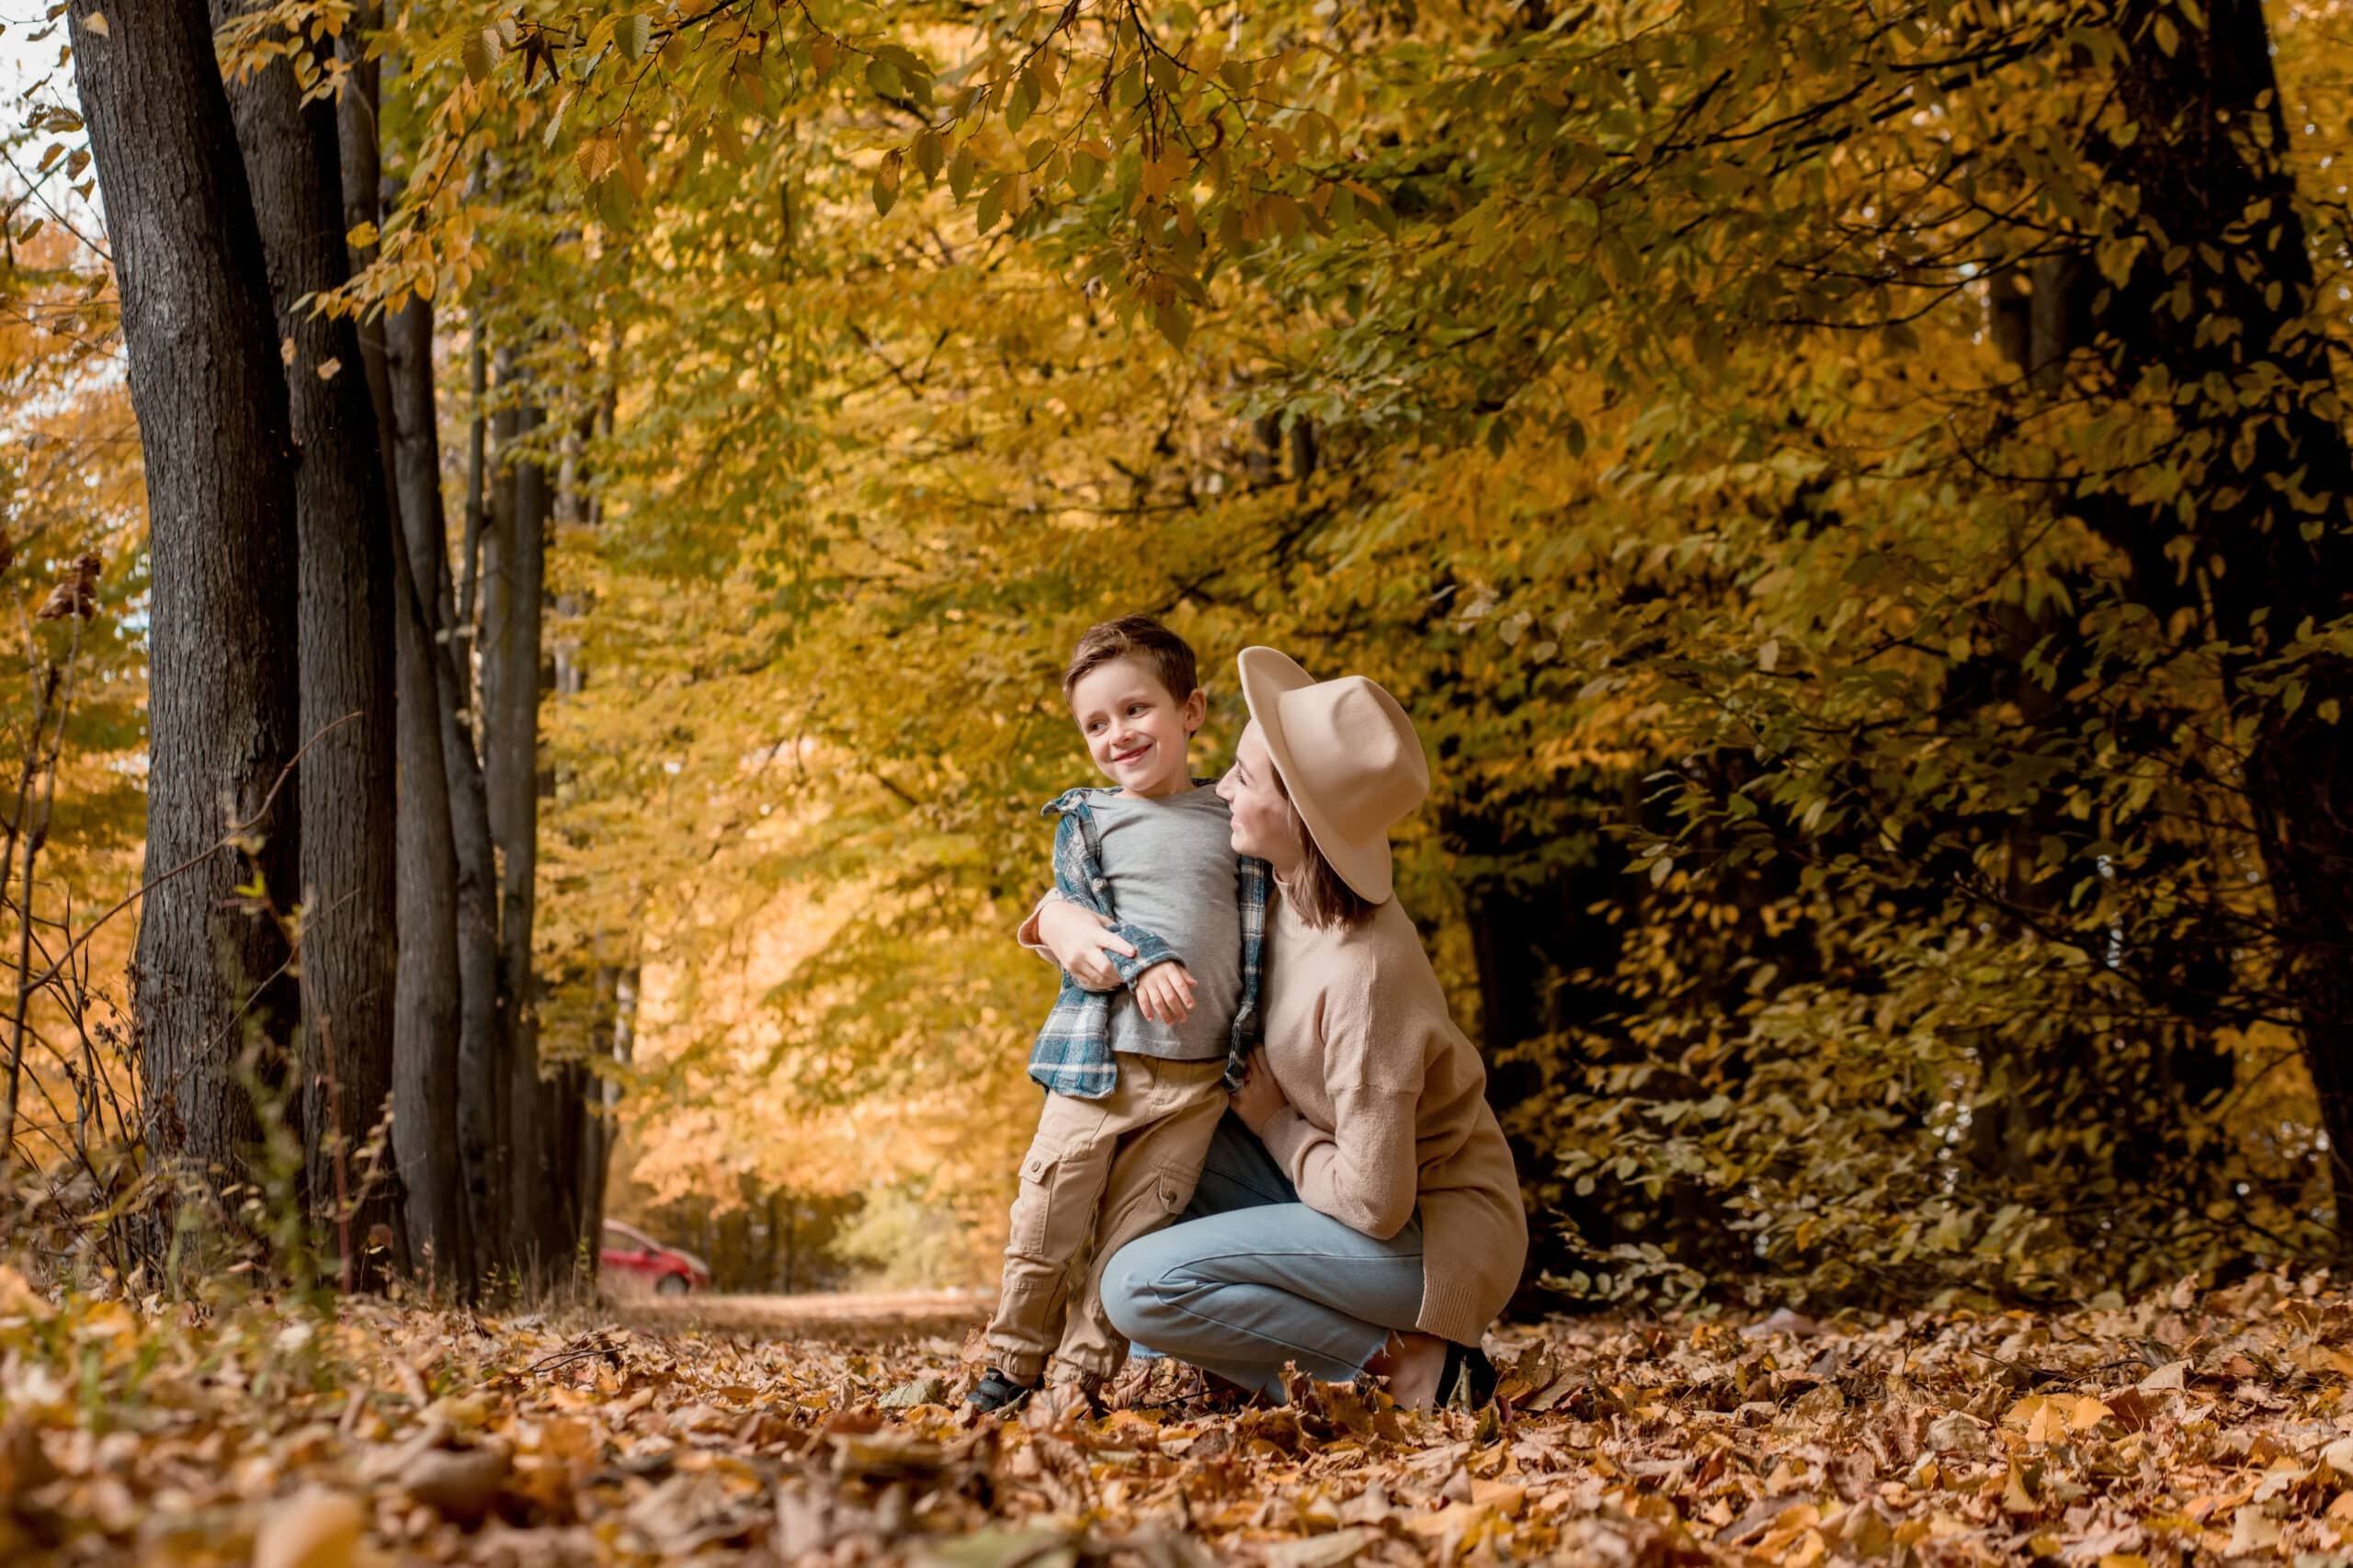 How to Take Beautiful Photos of Your Family This Fall